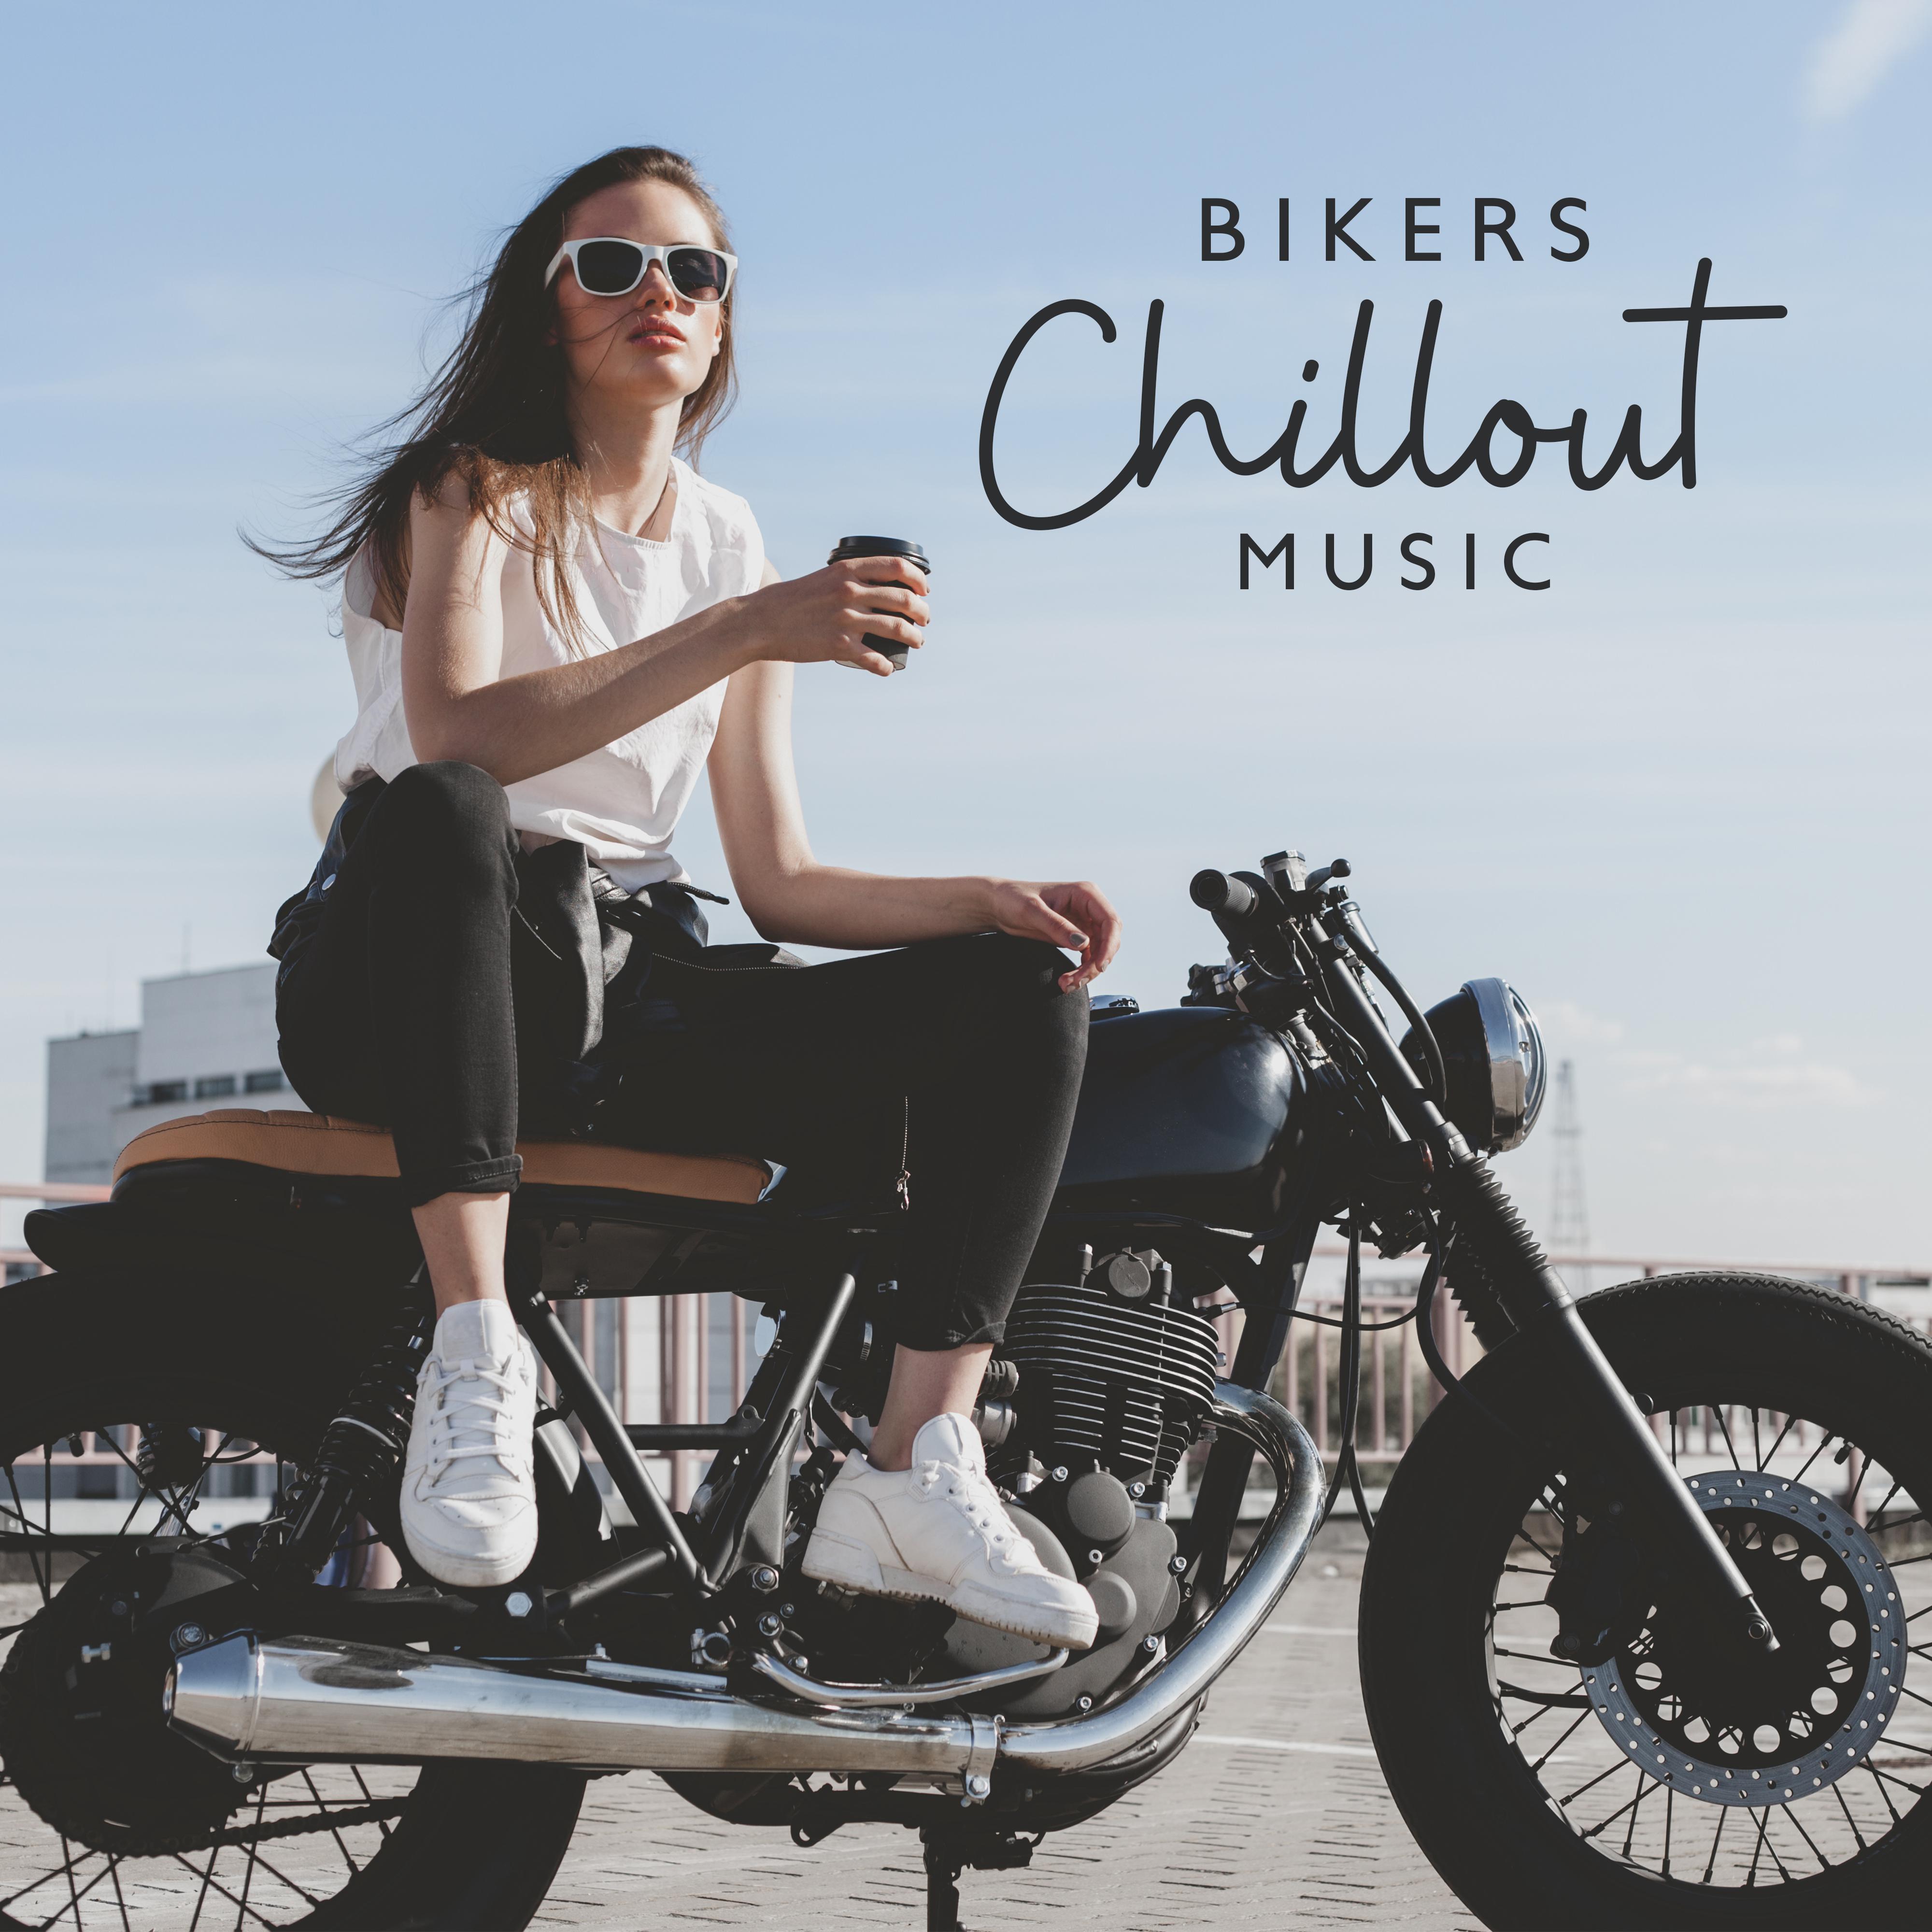 Bikers Chillout Music - 15 Tracks for Motorcycle, Chopper, Cruiser, Cross, Enduro and Others